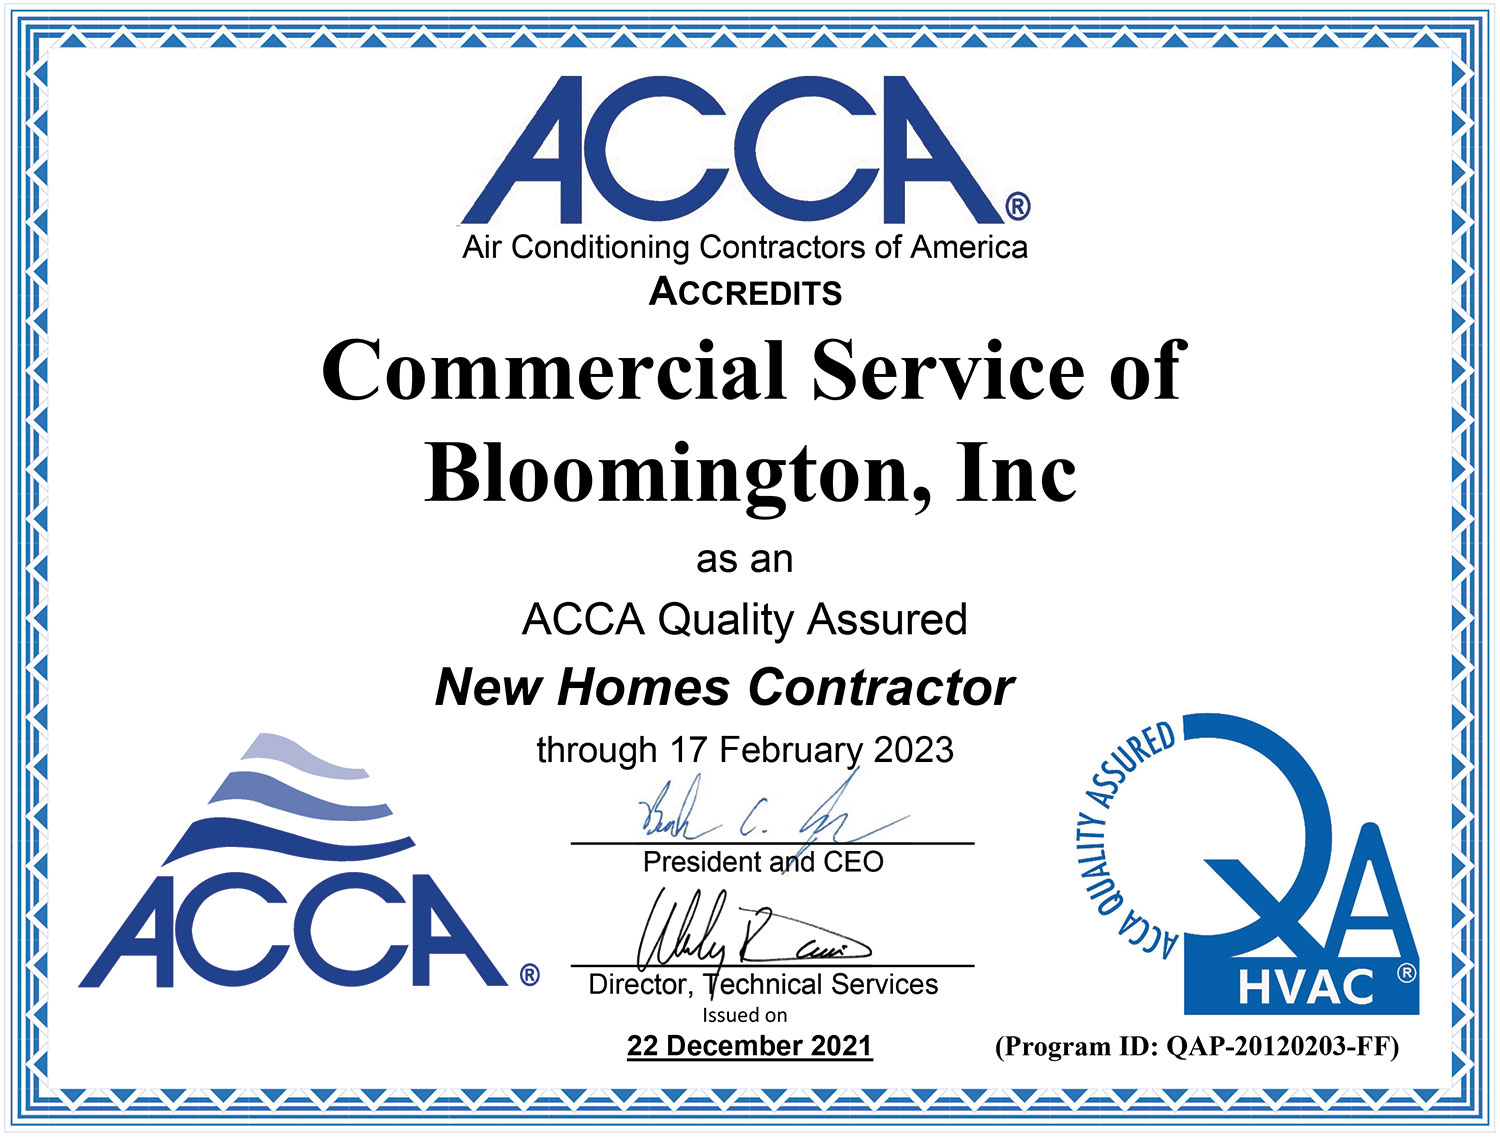 QAP Cert Accred Commercial Service of Bloomington Inc. 14044